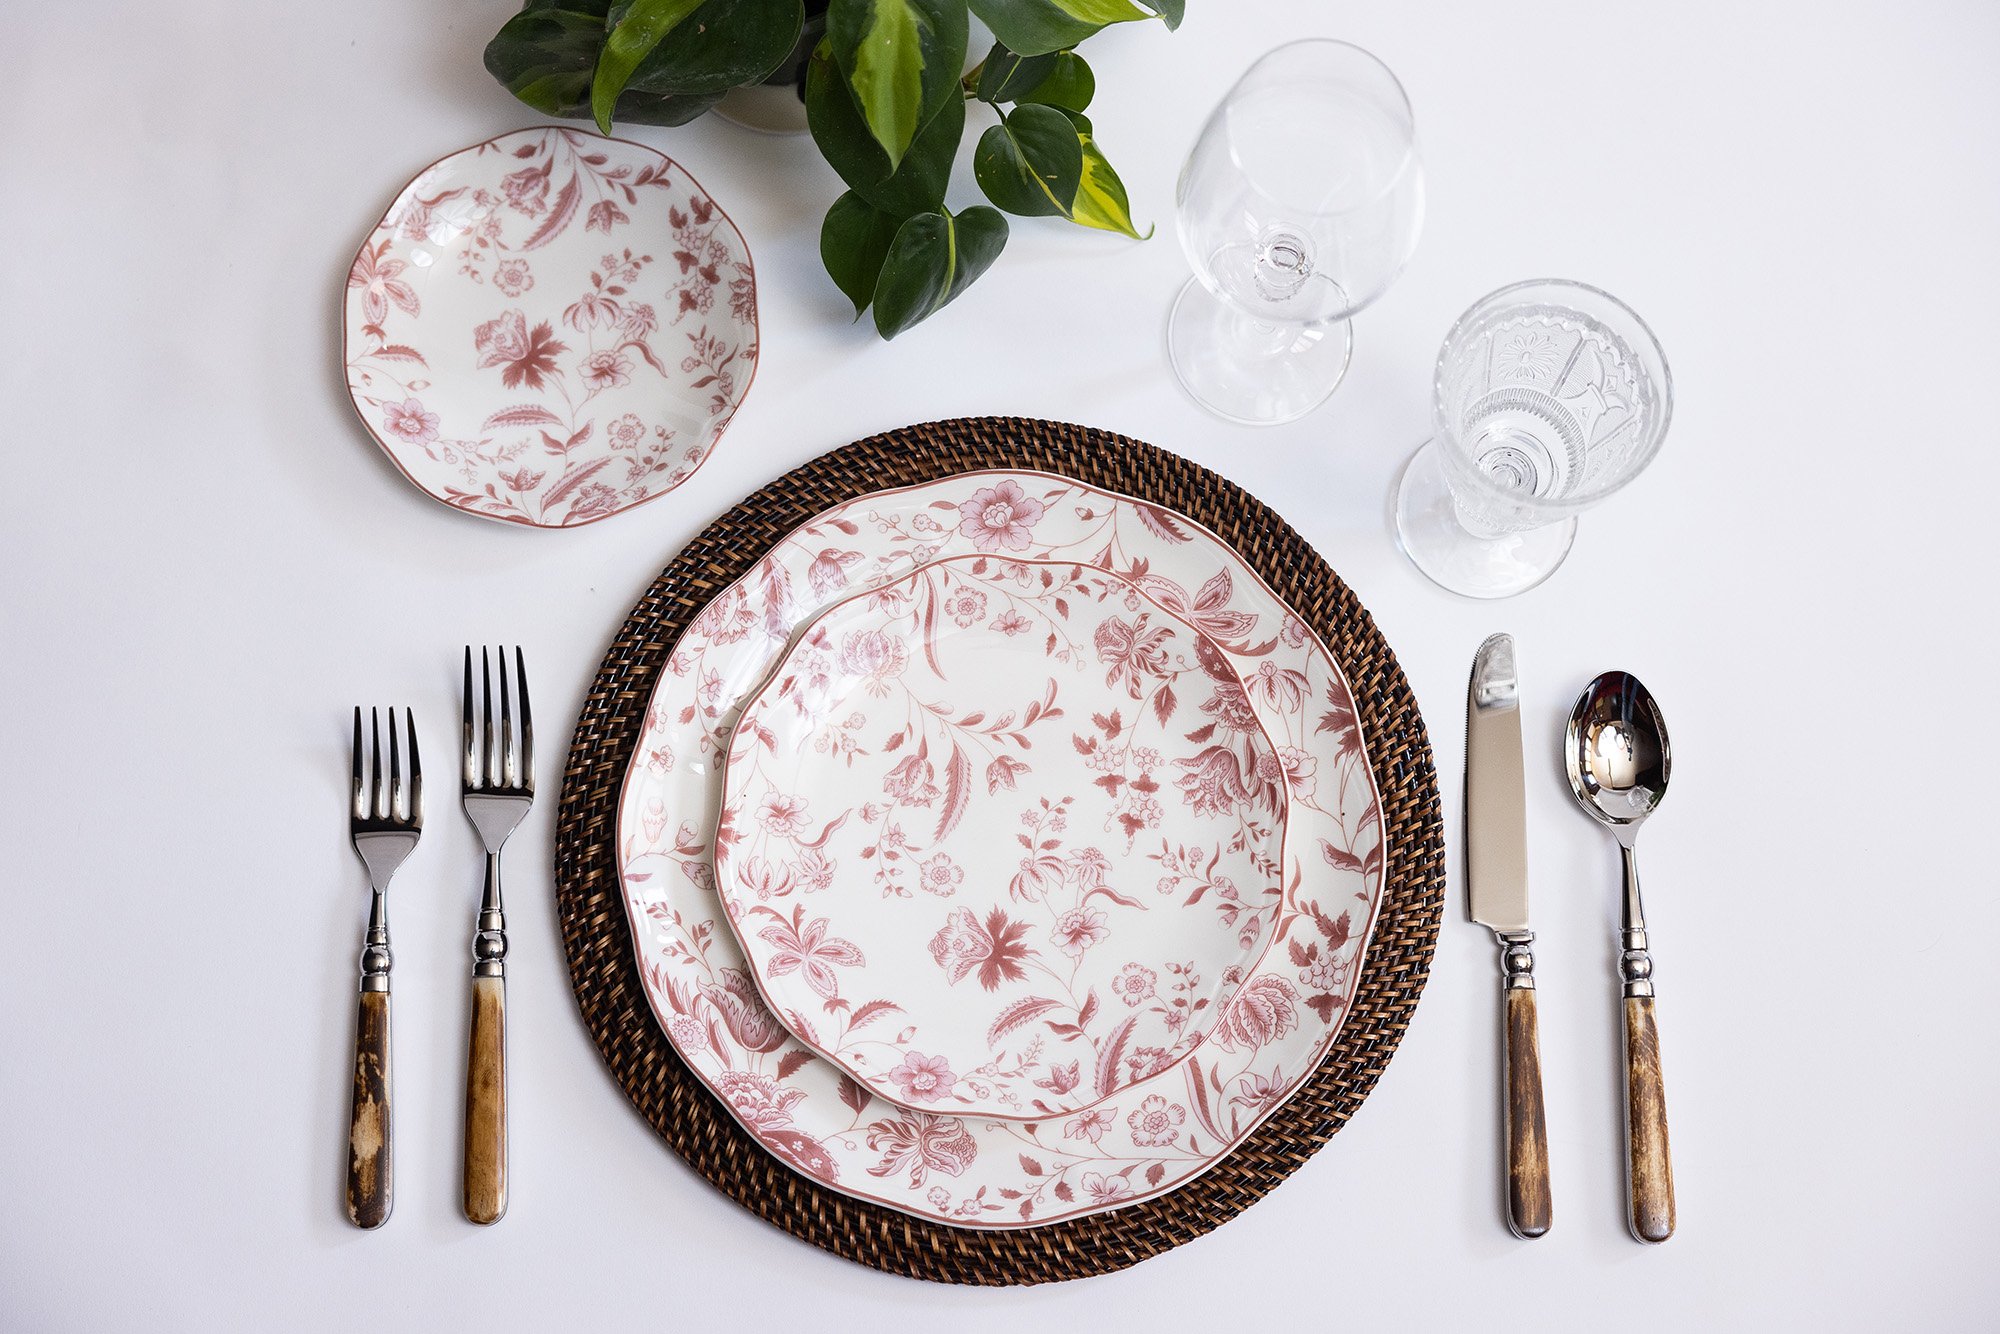 red-floral-plate-with-rattan-charger-and-wood-silverware-event-table-rental-chicago.jpg